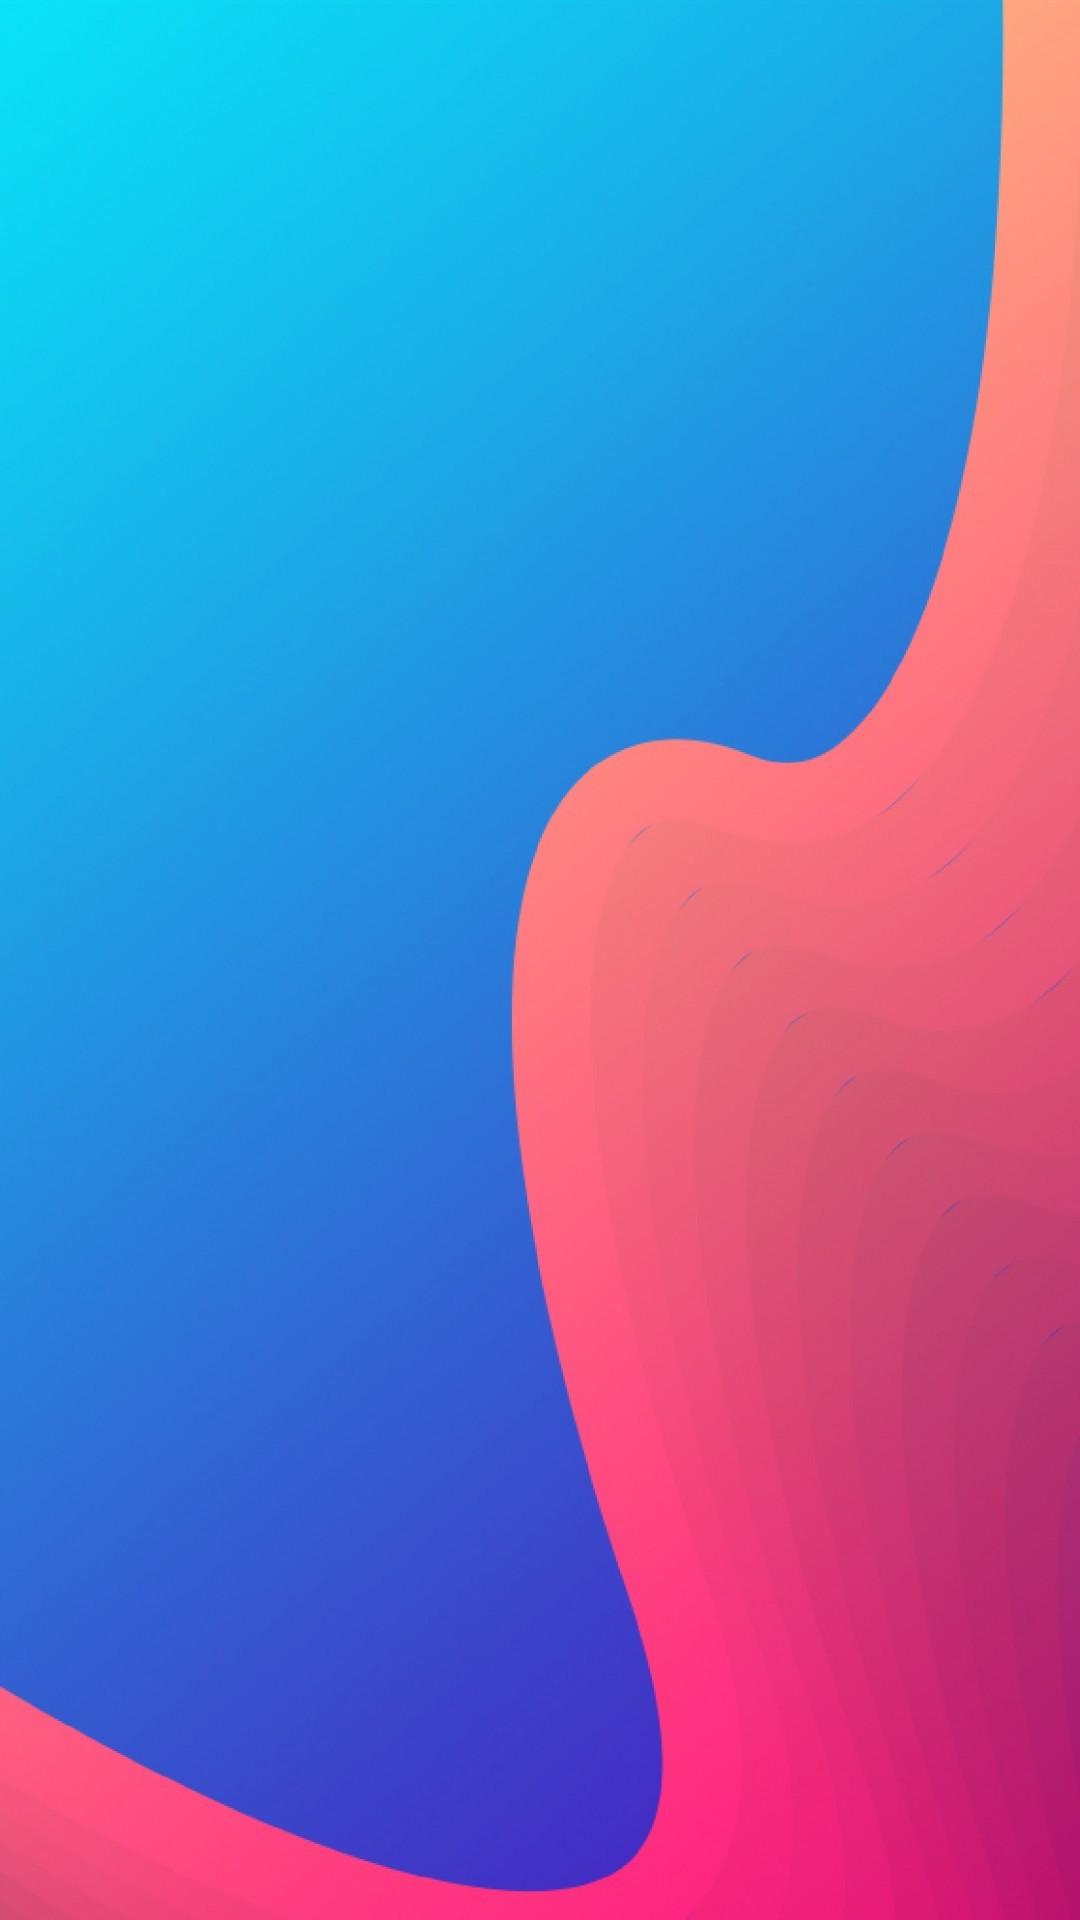 Download 1080x1920 Colorful Waves, Gradient, Orange And Blue